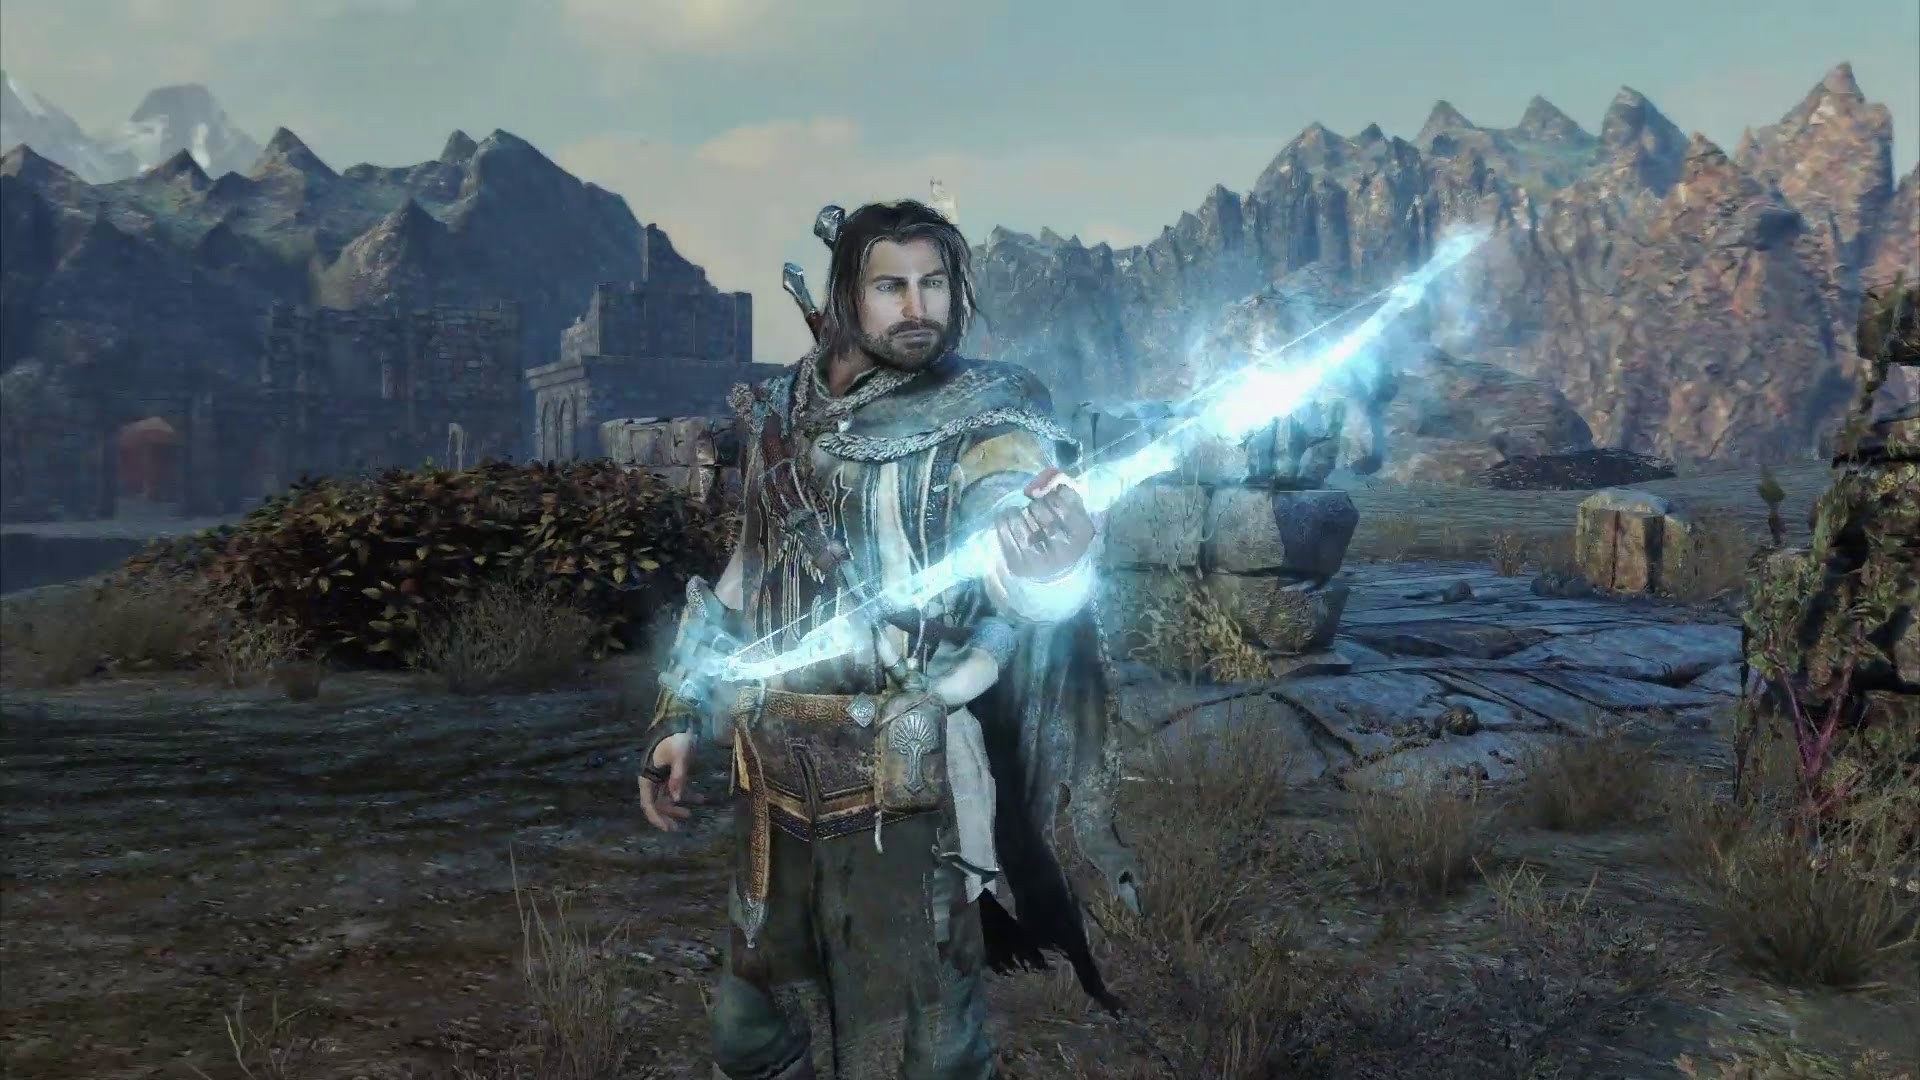 Shadow of mordor game. Middle-Earth: Shadow of Mordor. Middle-Earth Shadow of Mordor 2.